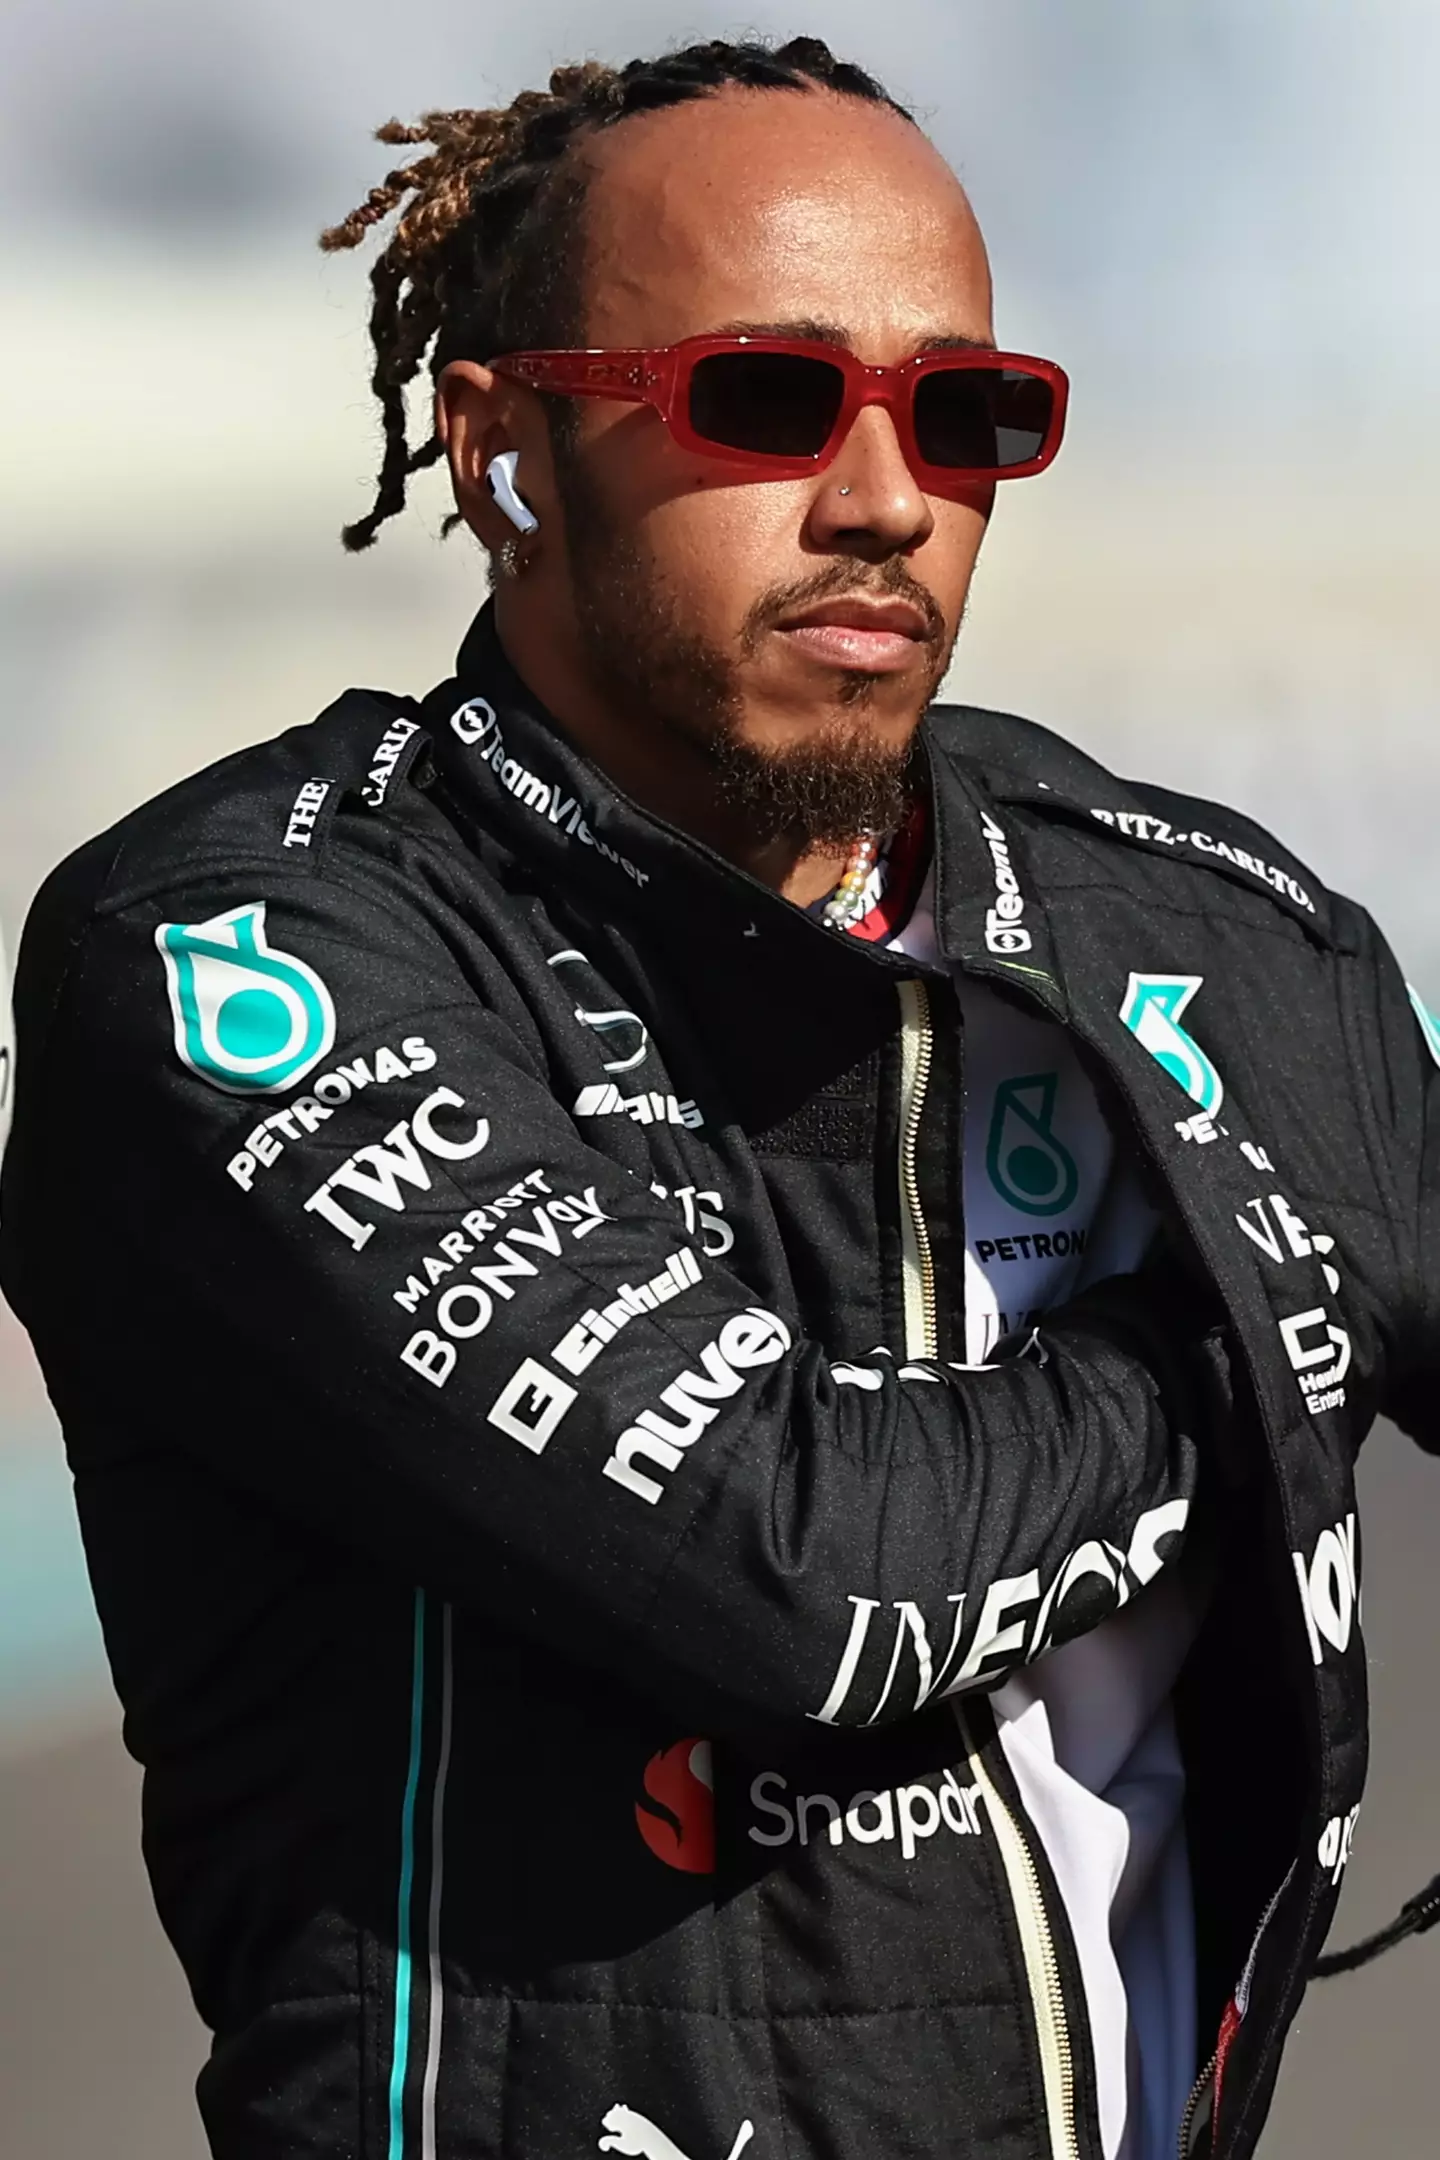 Hamilton only signed a new contact with Mercedes in the summer.